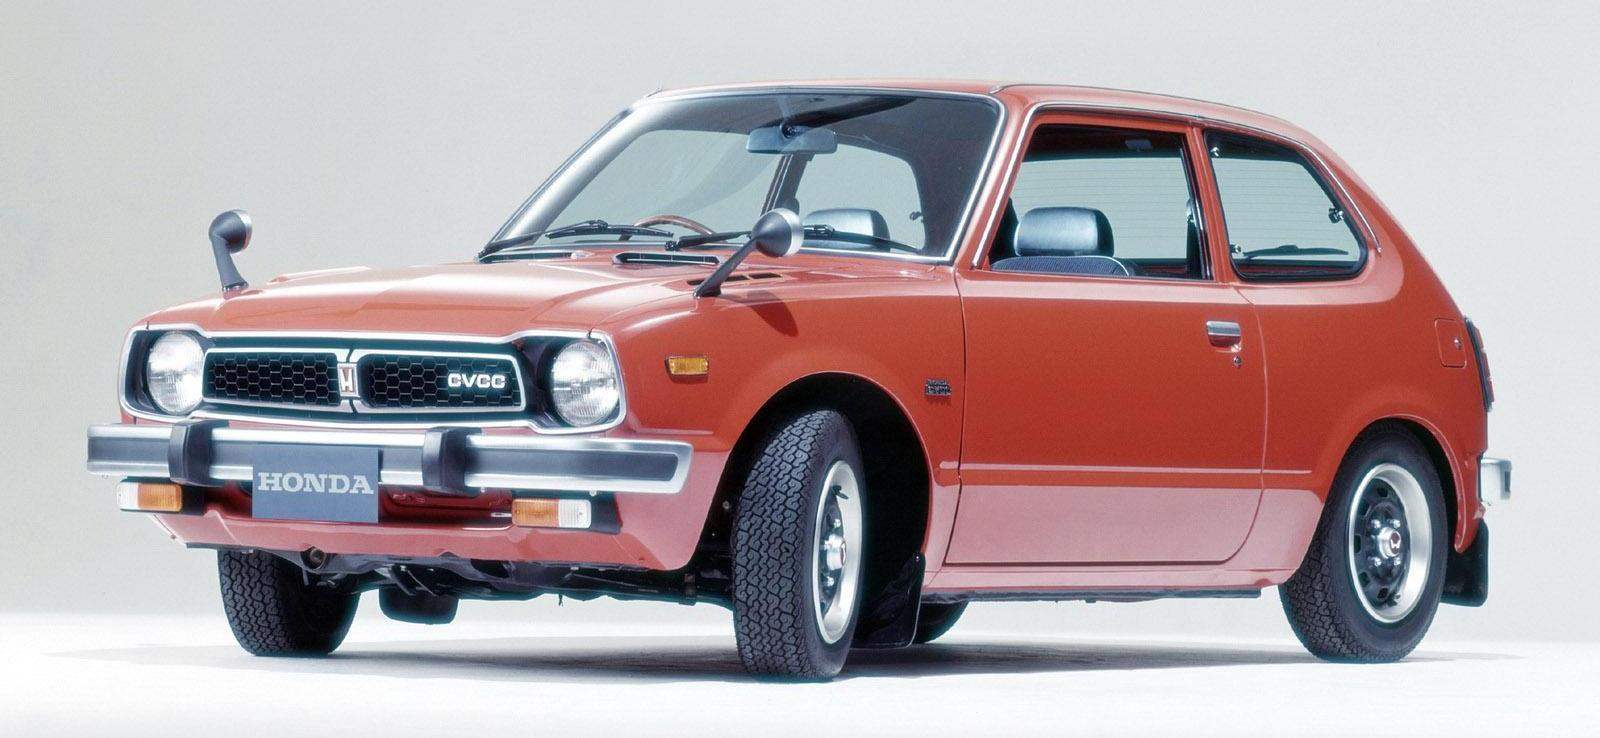 The first car called Civic sample 1972 Yuda, intended mainly for export. The car of a Golf class had a very economical and environmentally friendly engine with vortex combustion chamber